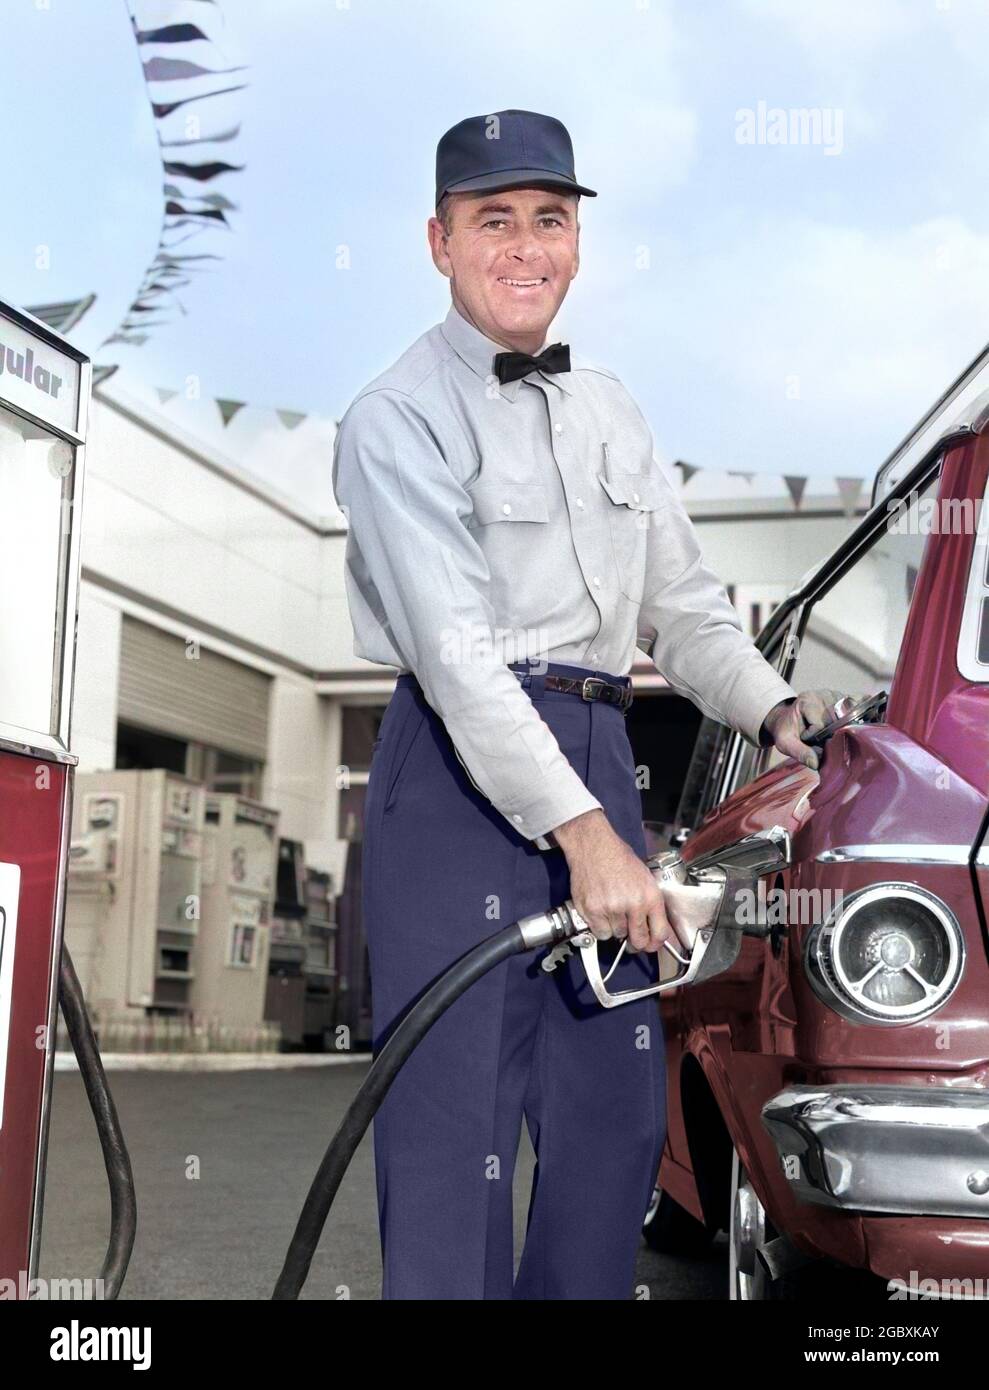 1960s MAN SERVICE STATION ATTENDANT WEARING CAP AND BOW TIE SMILING LOOKING AT CAMERA OUTSIDE WHILE PUMPING GASOLINE INTO CAR - m6771c HAR001 HARS JOBS COPY SPACE FRIENDSHIP HALF-LENGTH PERSONS AUTOMOBILE MALES PROFESSION CONFIDENCE TRANSPORTATION EYE CONTACT SKILL OCCUPATION HAPPINESS SKILLS FILLING OWNER GAS STATION CUSTOMER SERVICE AND SERVICE STATION CAREERS LABOR PRIDE EMPLOYMENT OCCUPATIONS PUMPING SMILES FILL GASOLINE STATION WAGON AUTOMOBILES JOYFUL VEHICLES BOW TIE EMPLOYEE ATTENDANT MERCHANT MID-ADULT MID-ADULT MAN PETROL PETROLEUM WHILE CAUCASIAN ETHNICITY FILL UP FOSSIL FUEL HAR001 Stock Photo